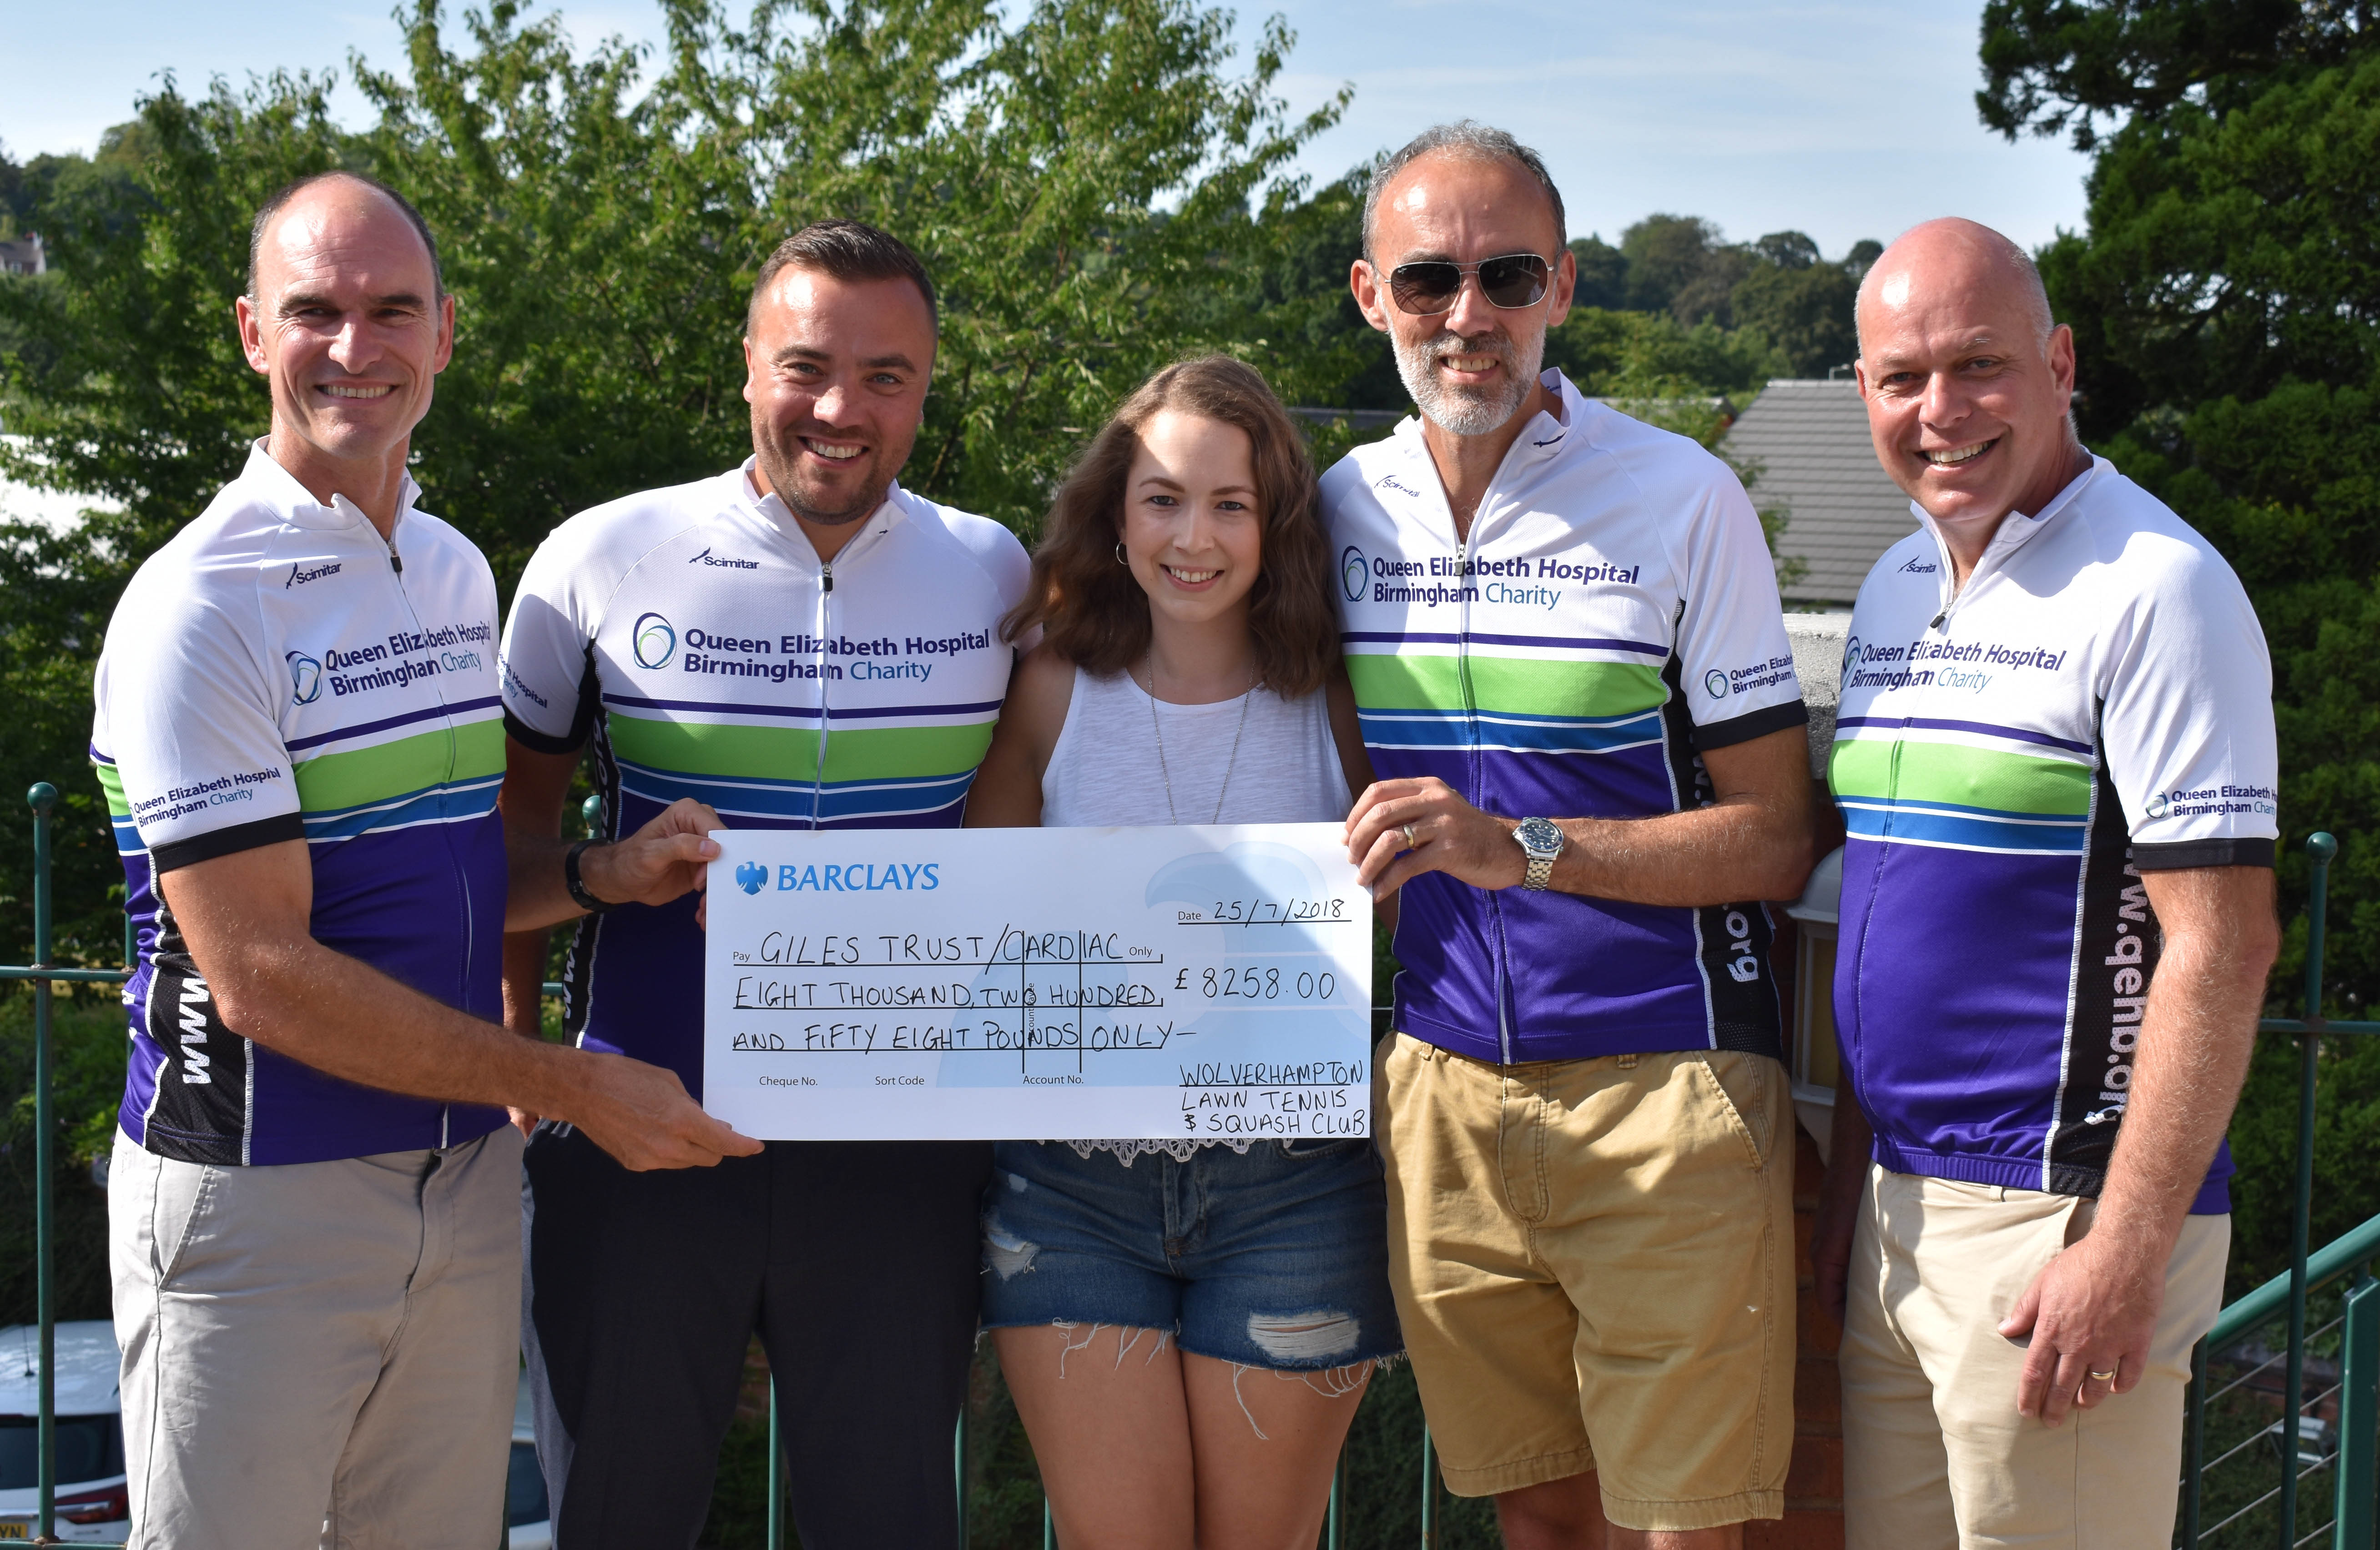 Over £8,000 Raised From Aberdovey Bike Ride